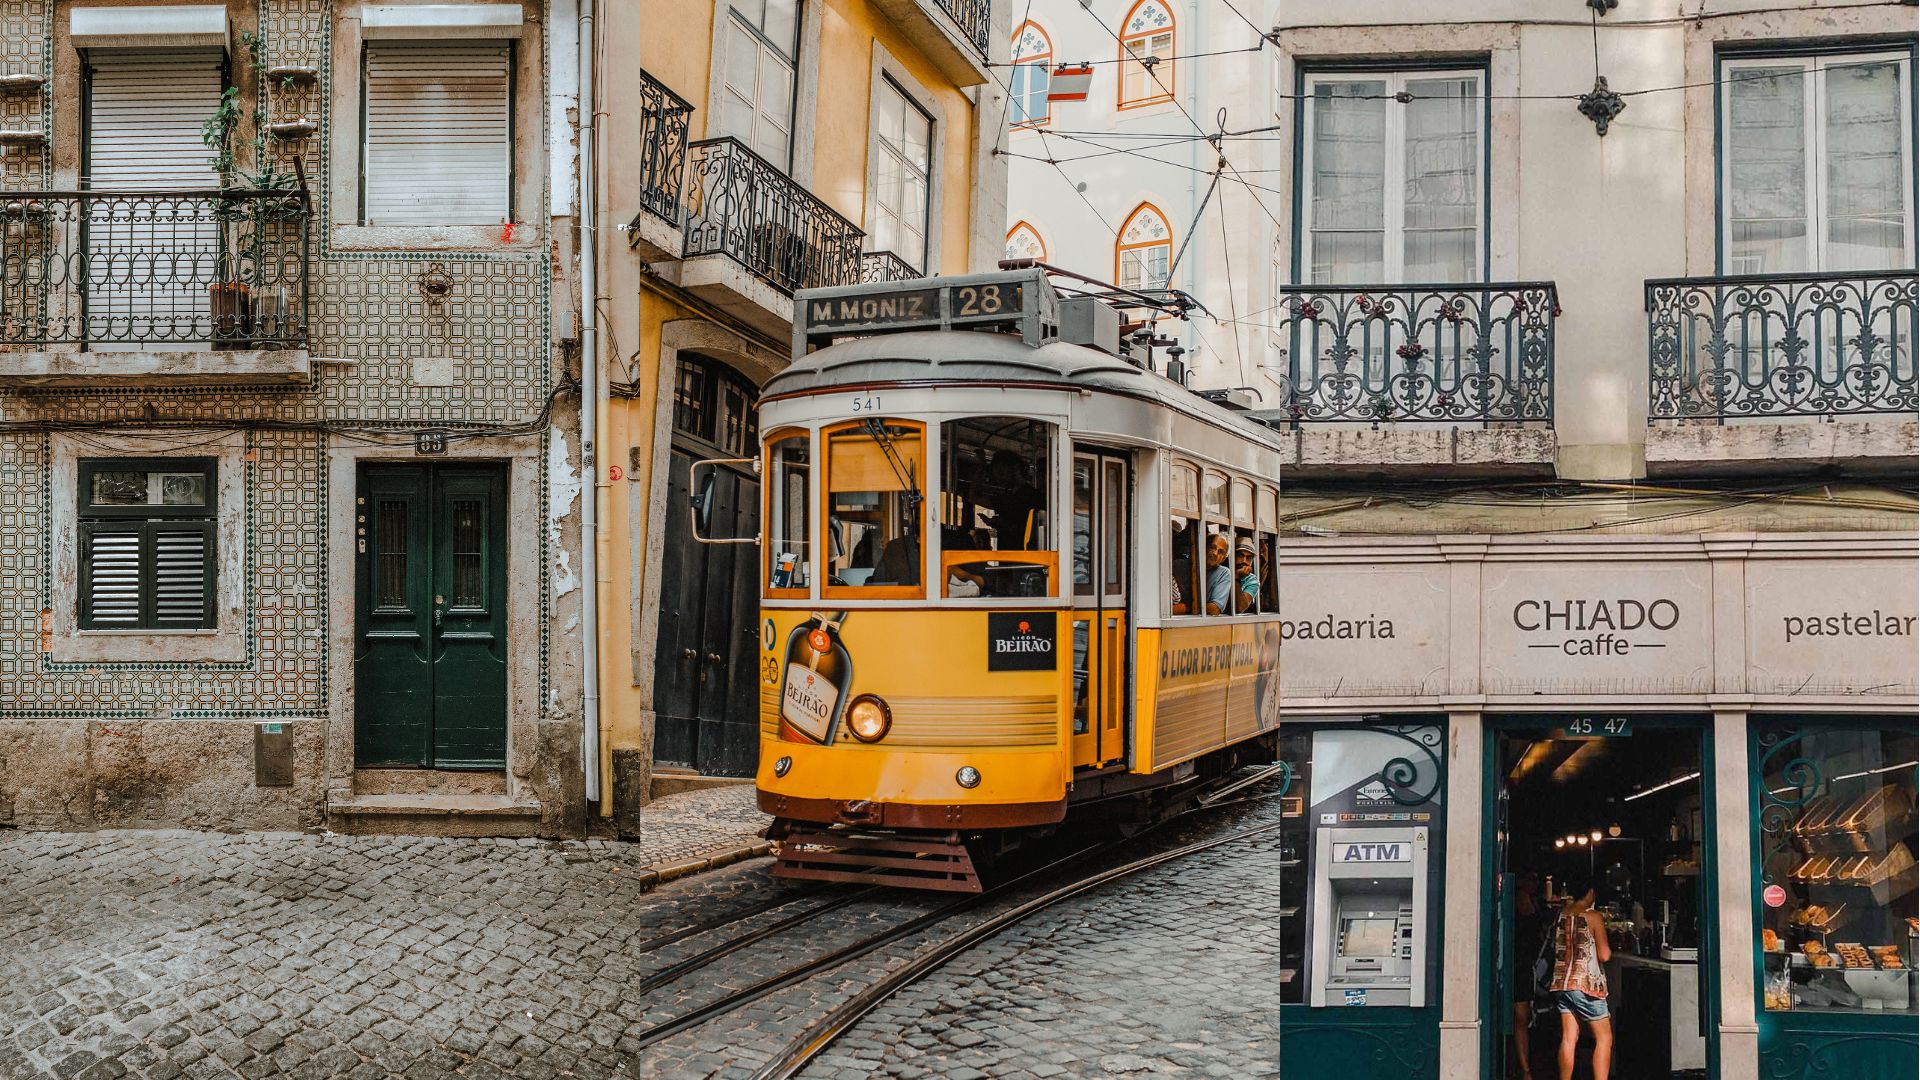 10 Amazing Cheap Things to Do in Lisbon, Portugal - Shygirladventures